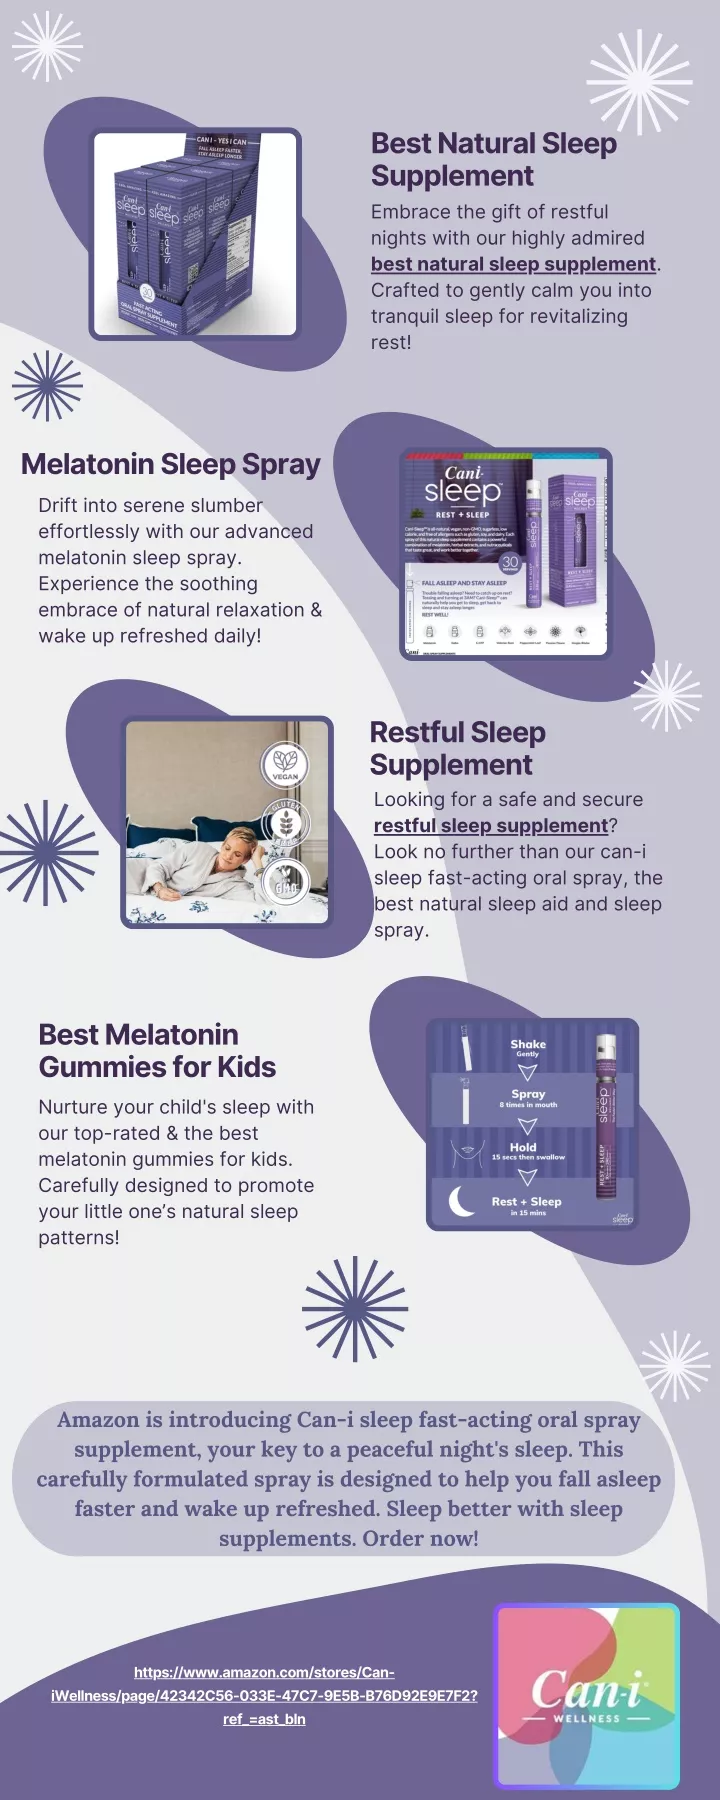 best natural sleep supplement embrace the gift